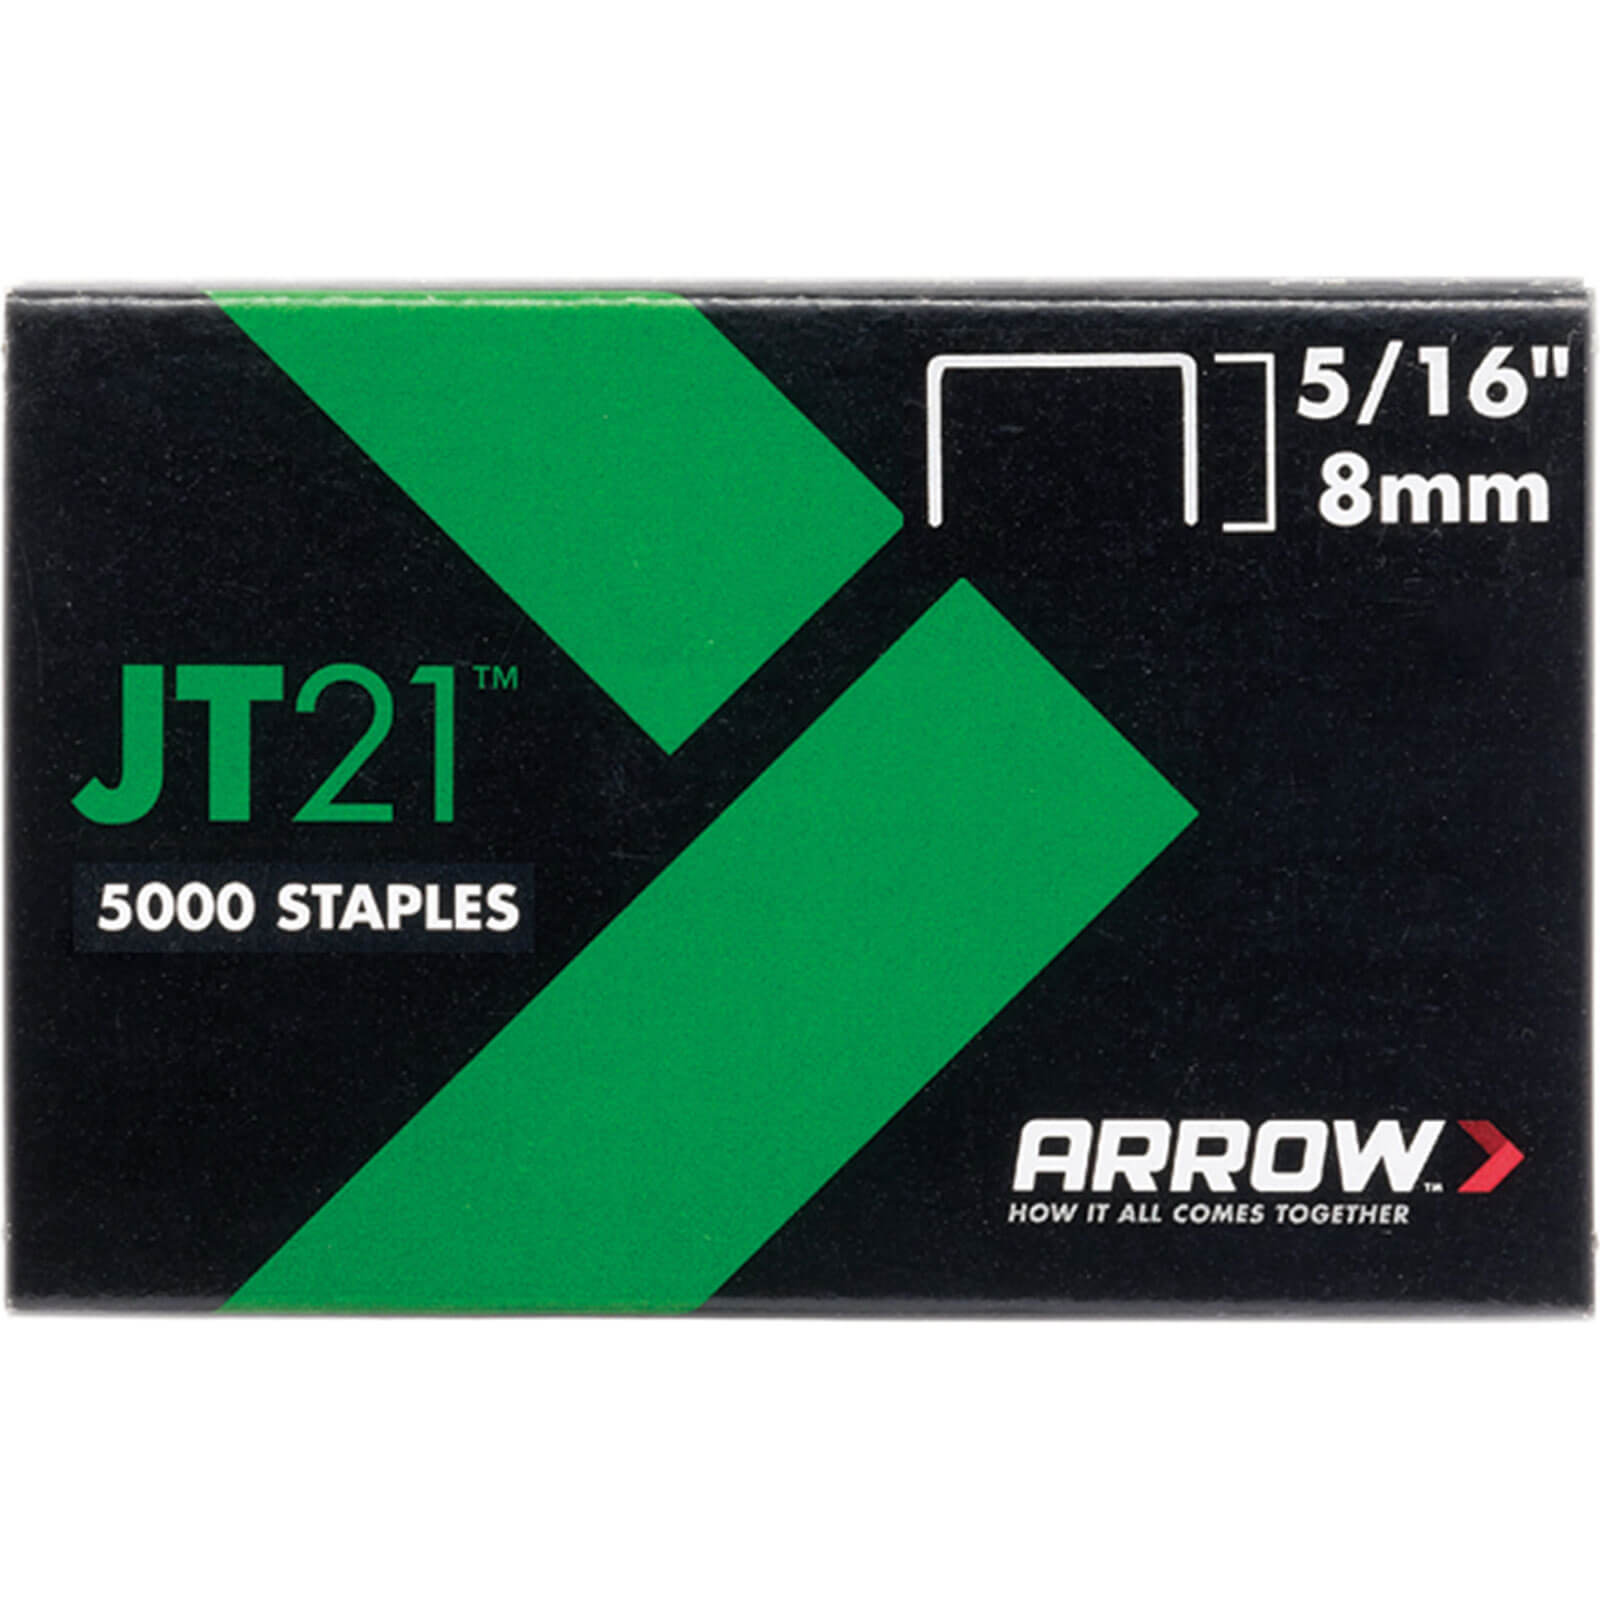 Arrow 215 Staples 8mm / 5/16" Pack of 1000 to fit JT21 & 21C